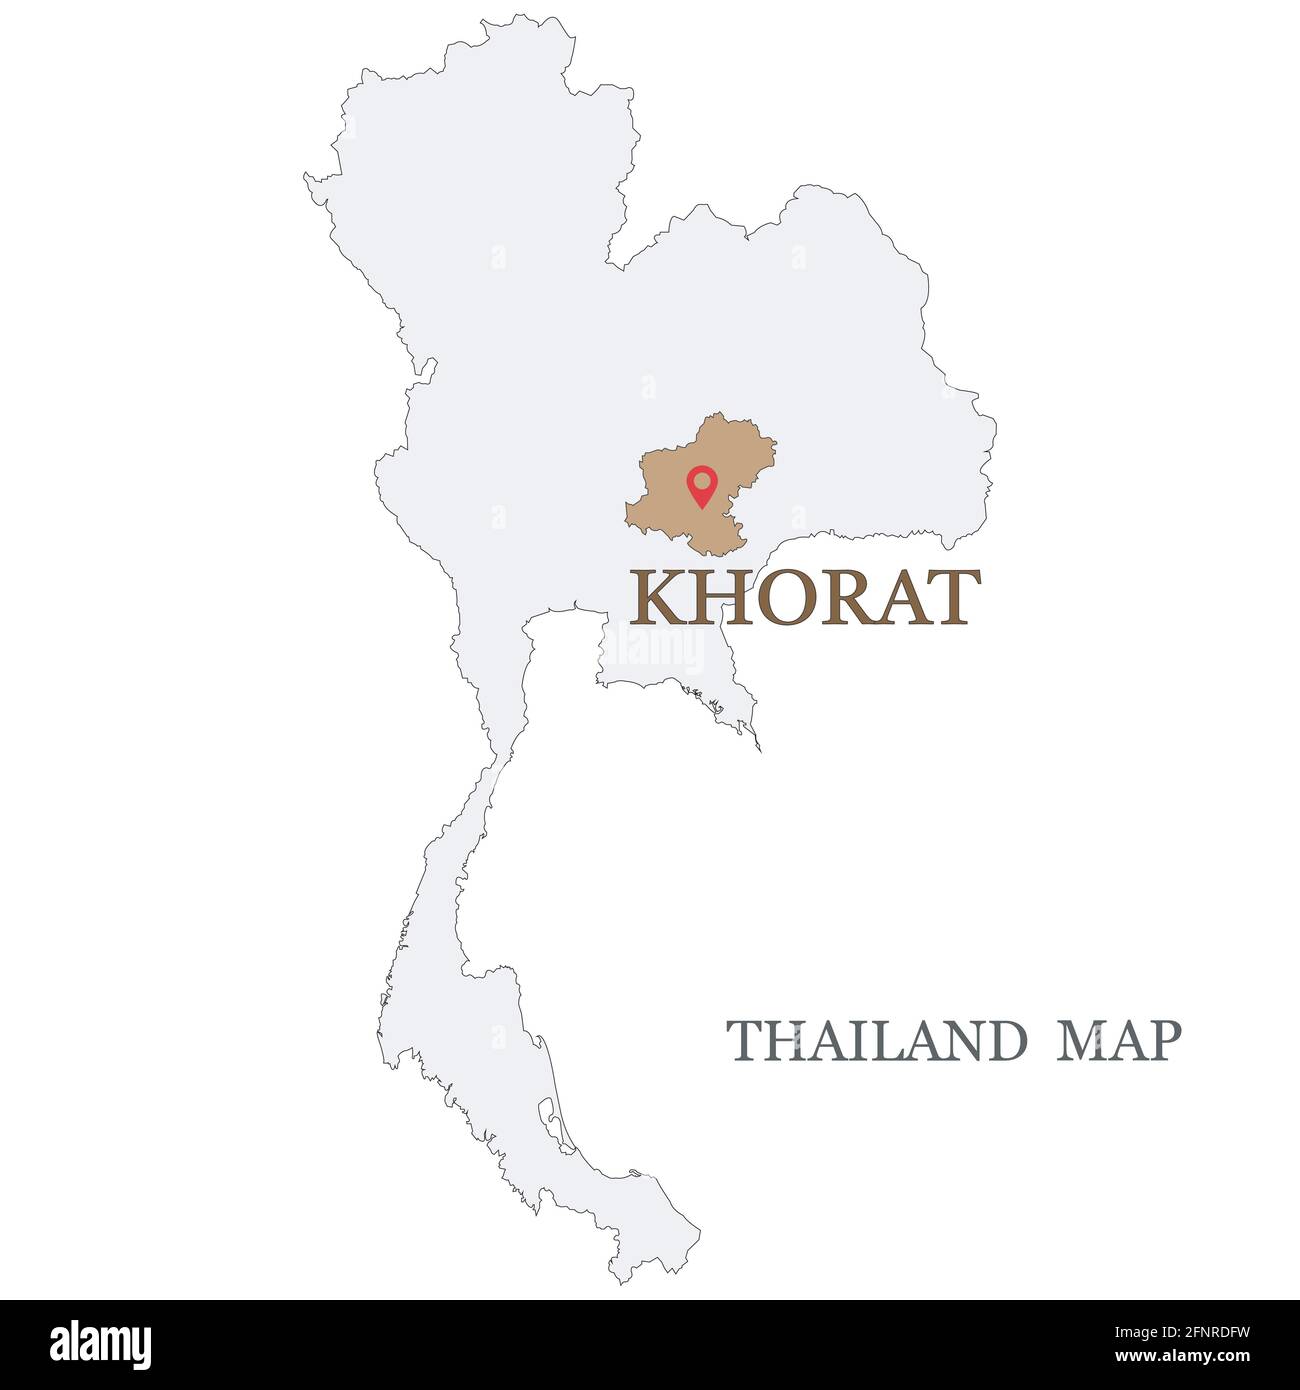 Maps Of Thailand With Red Maps Pin On Khorat Korat Or Nakhon Ratchasima Province In Golden Brown Area In White Background Stock Vector Image Art Alamy